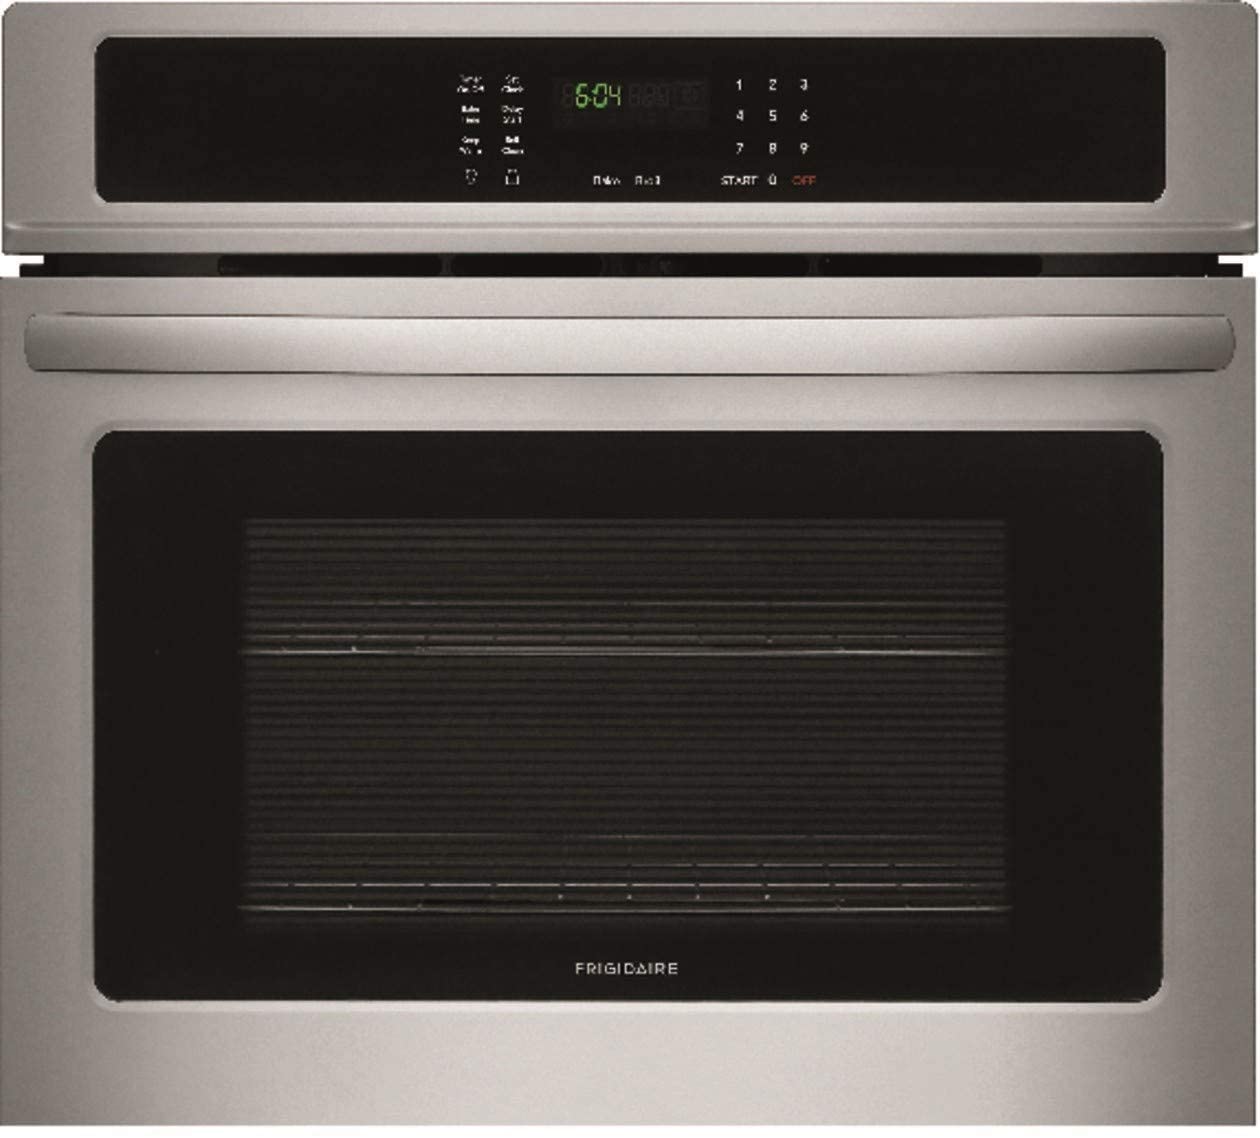 Best Budget with Great Value Single Wall Oven